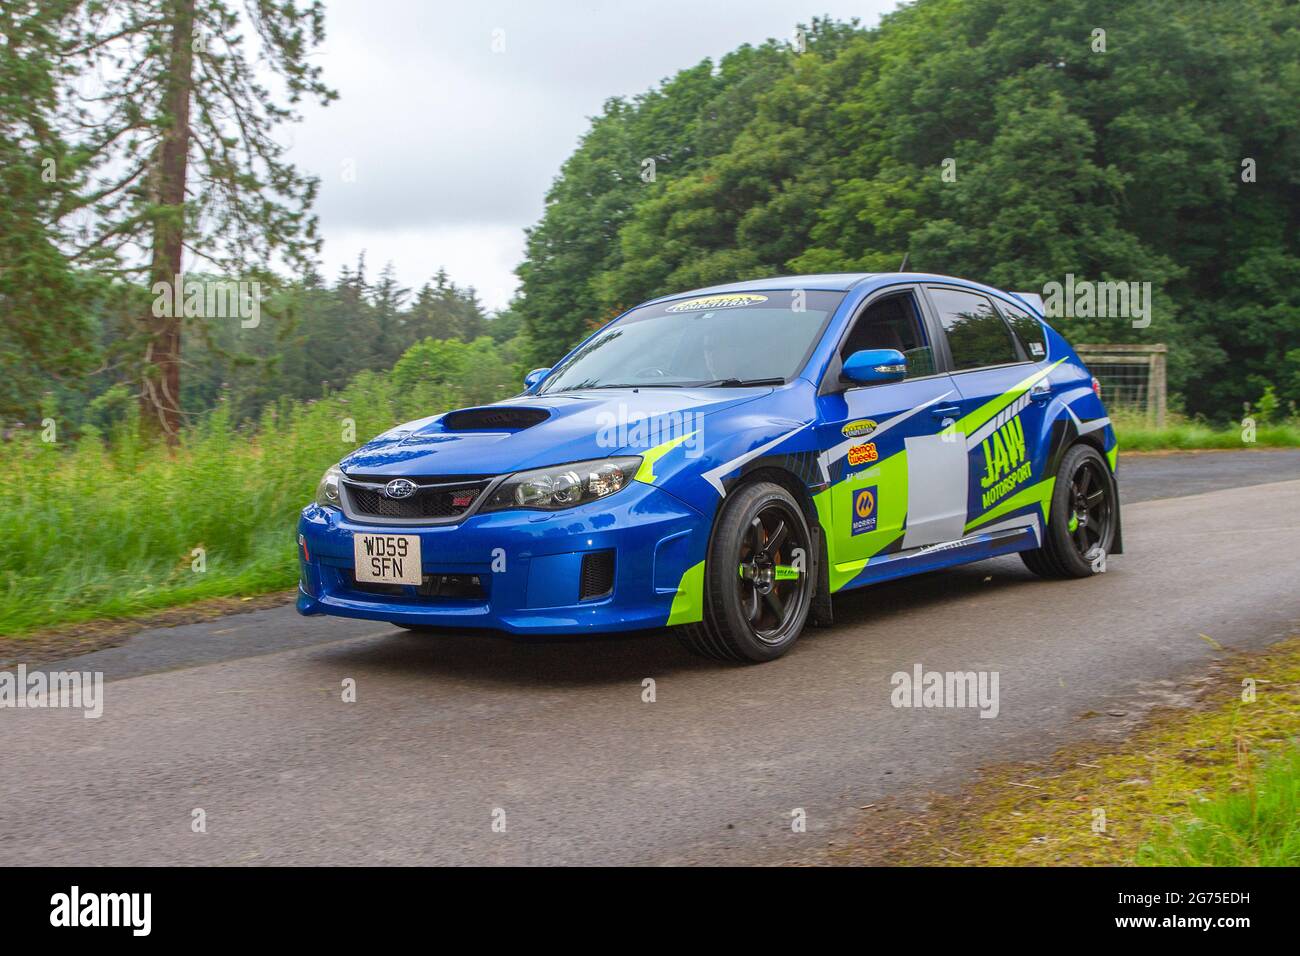 2009 blue Subaru Impreza 19990 cc petrol 'Jaw Motorsport' in racing livery  rally car en-route KLMC The Cars The Star Show in Holker Hall & Gardens,  Grange-over-Sands, UK Stock Photo - Alamy